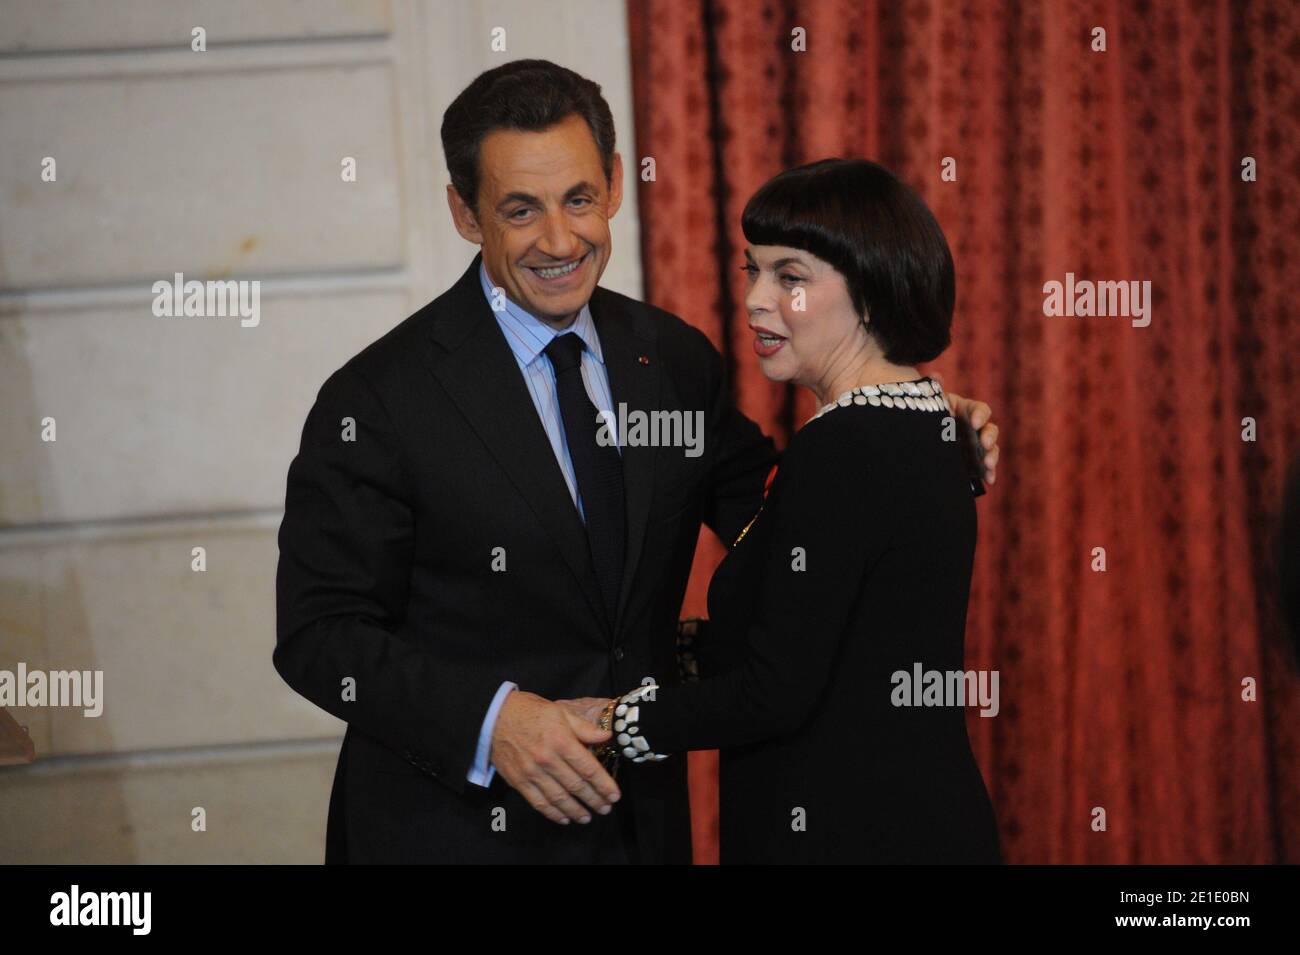 French singer Mireille Mathieu receives the Legion d'Honneur by French President Nicolas Sarkozy at Elysee Palace in Paris, France on January 26, 2011. Photo by Mousse/ABACAPRESS.COM Stock Photo